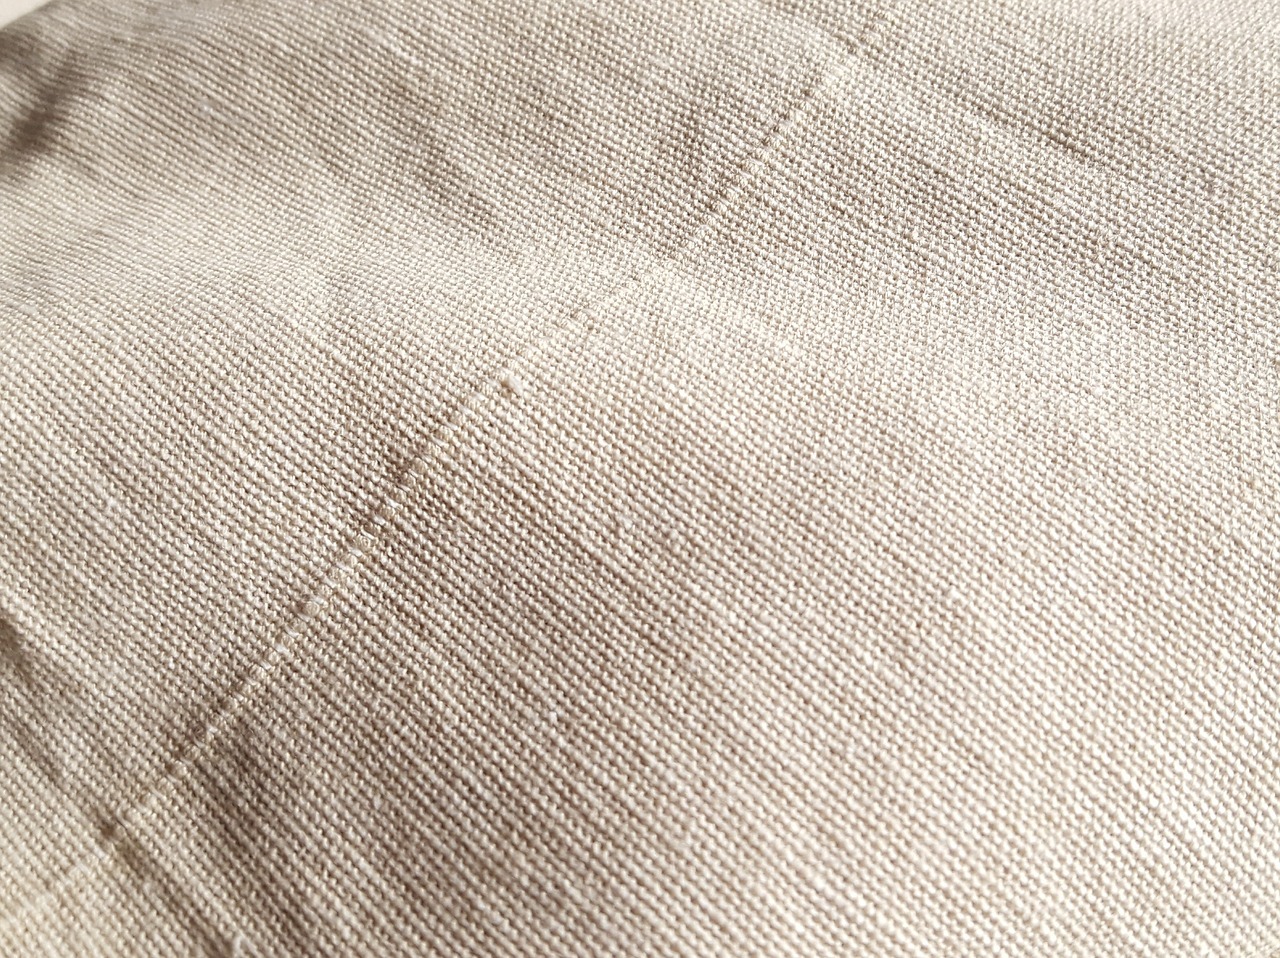 uses-of-linen